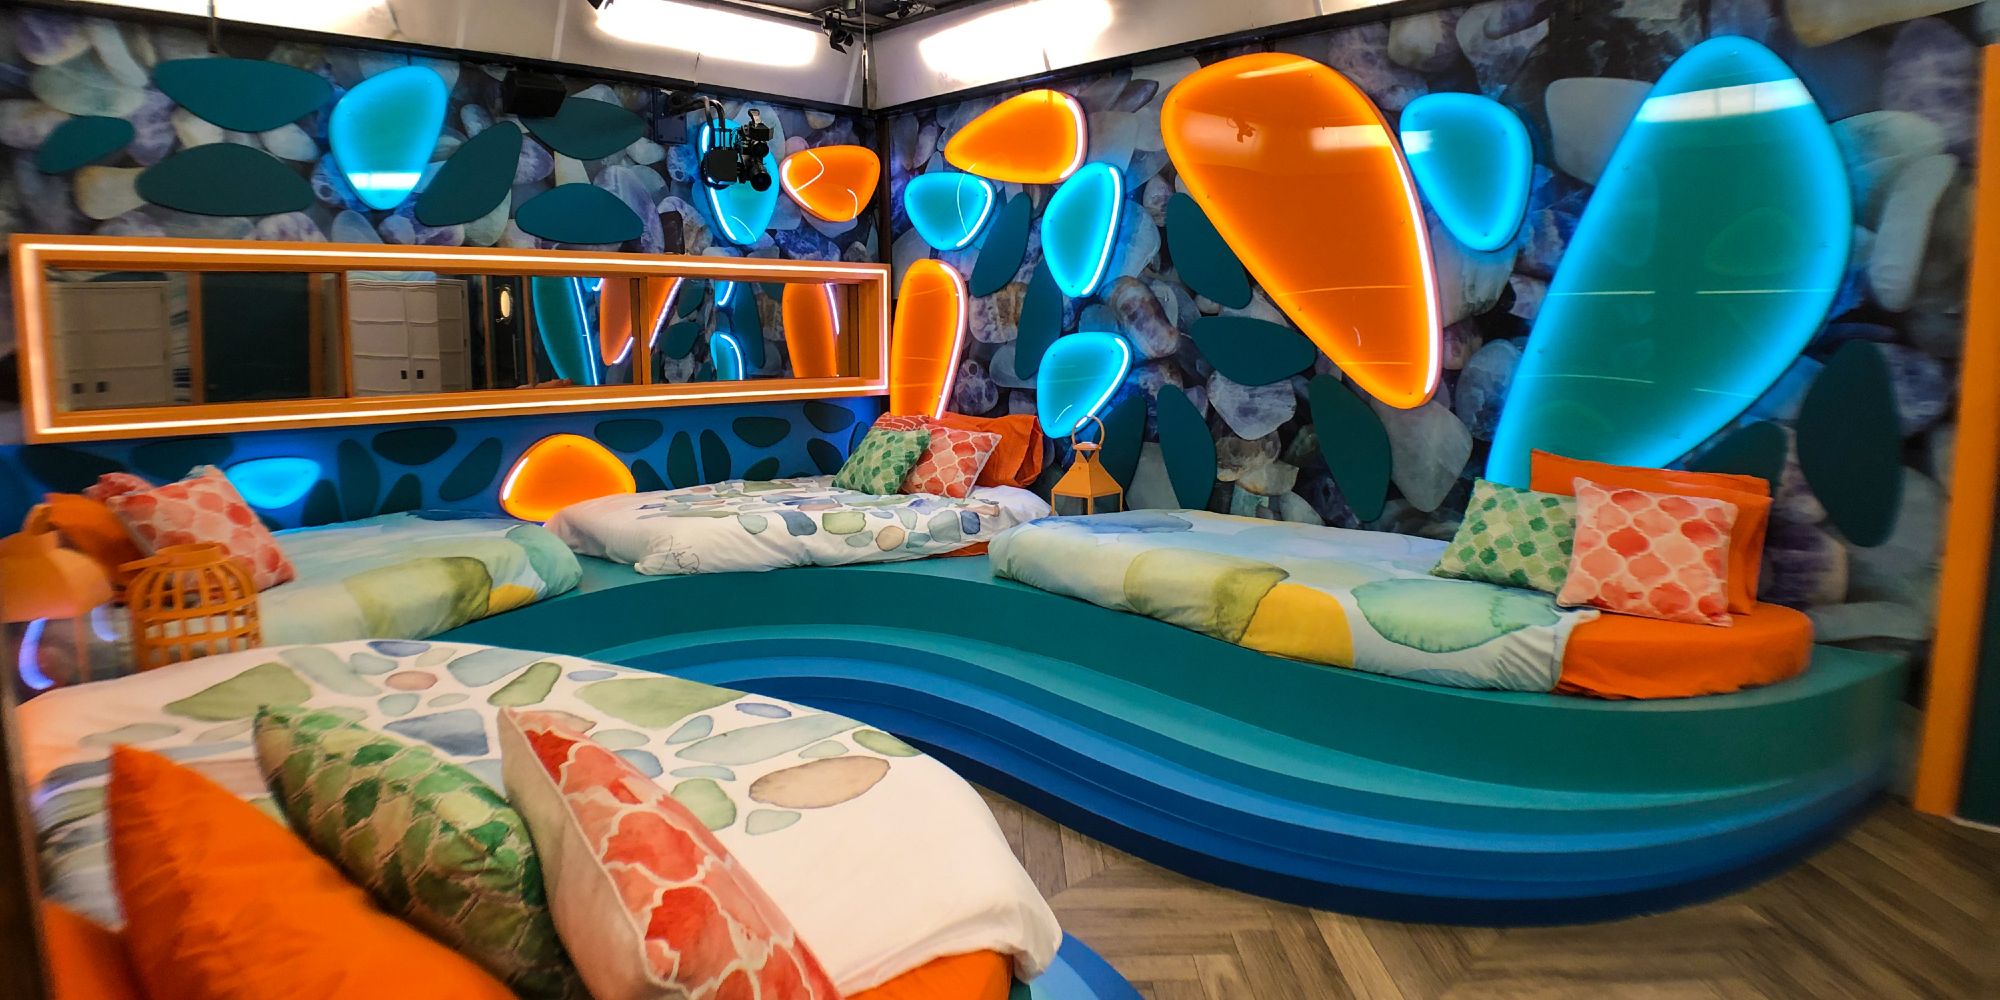 The Sea Glass bedroom from the 23rd season of Big Brother.